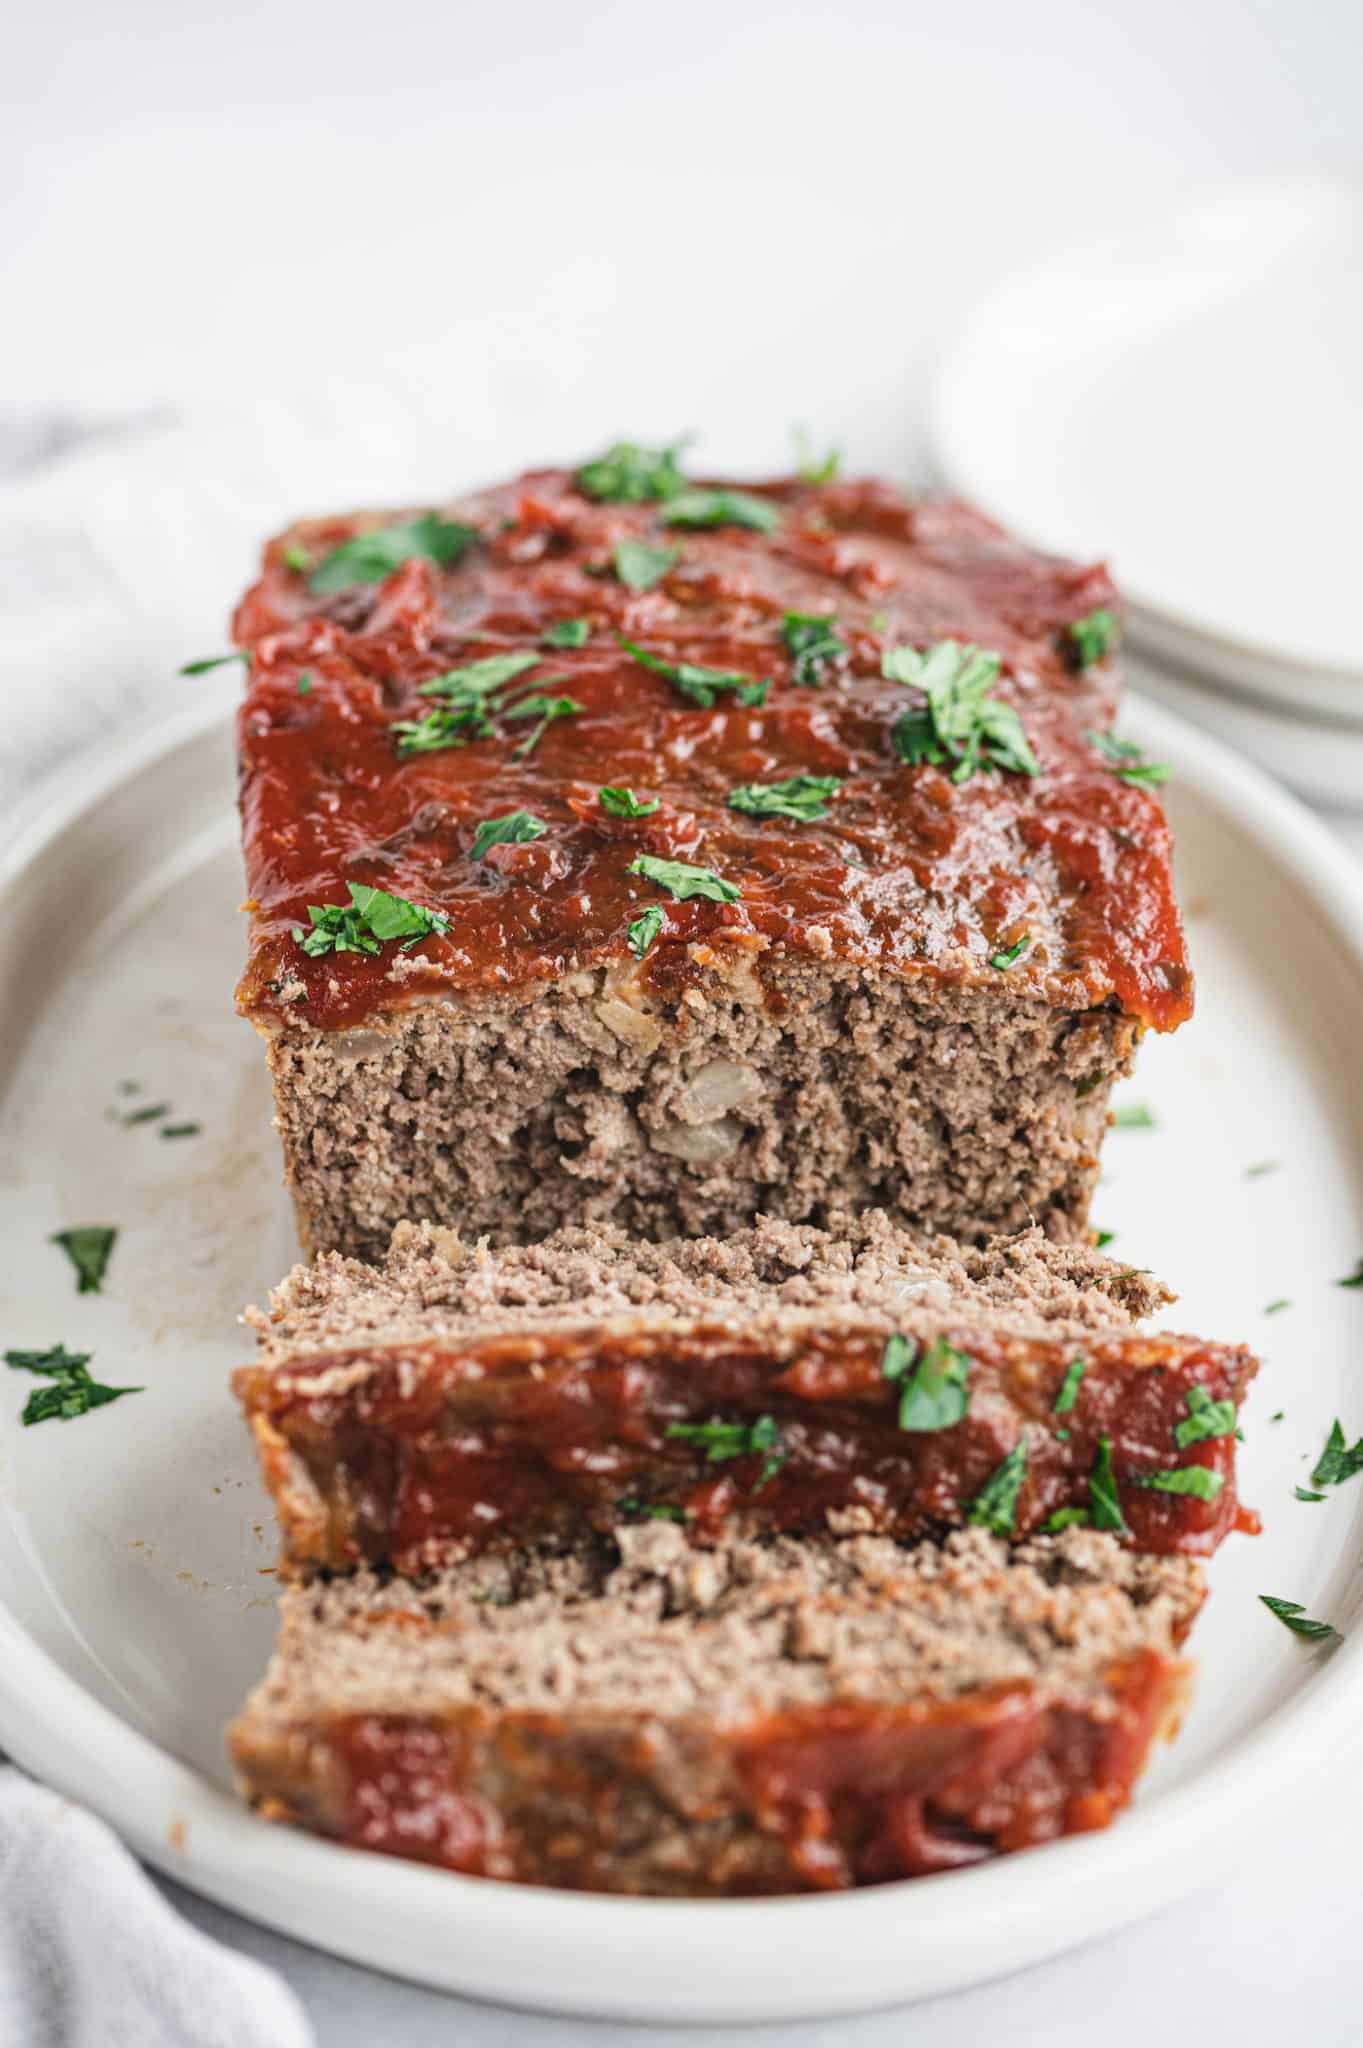 sliced meatloaf made without breadcrumbs served on a plate.